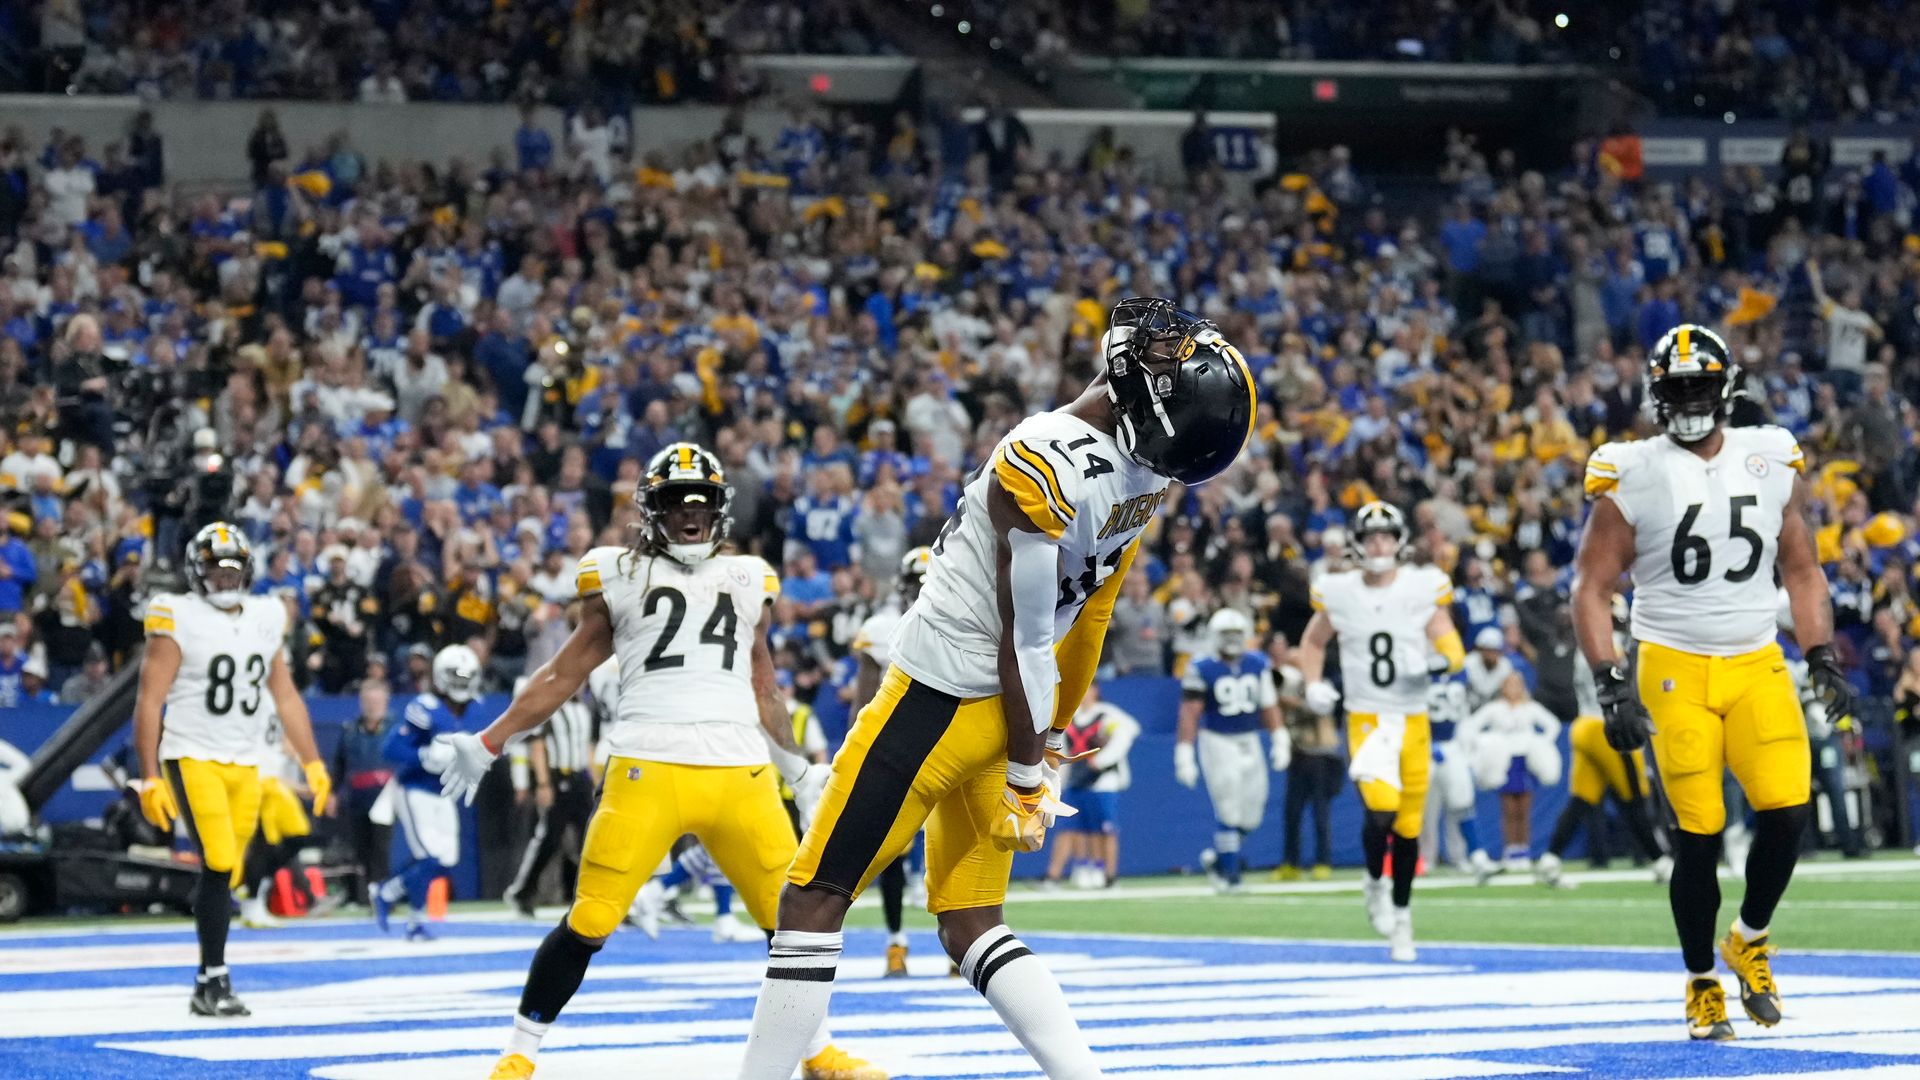 Pickens pulls out Ronaldo's Siu celebration for Steelers!